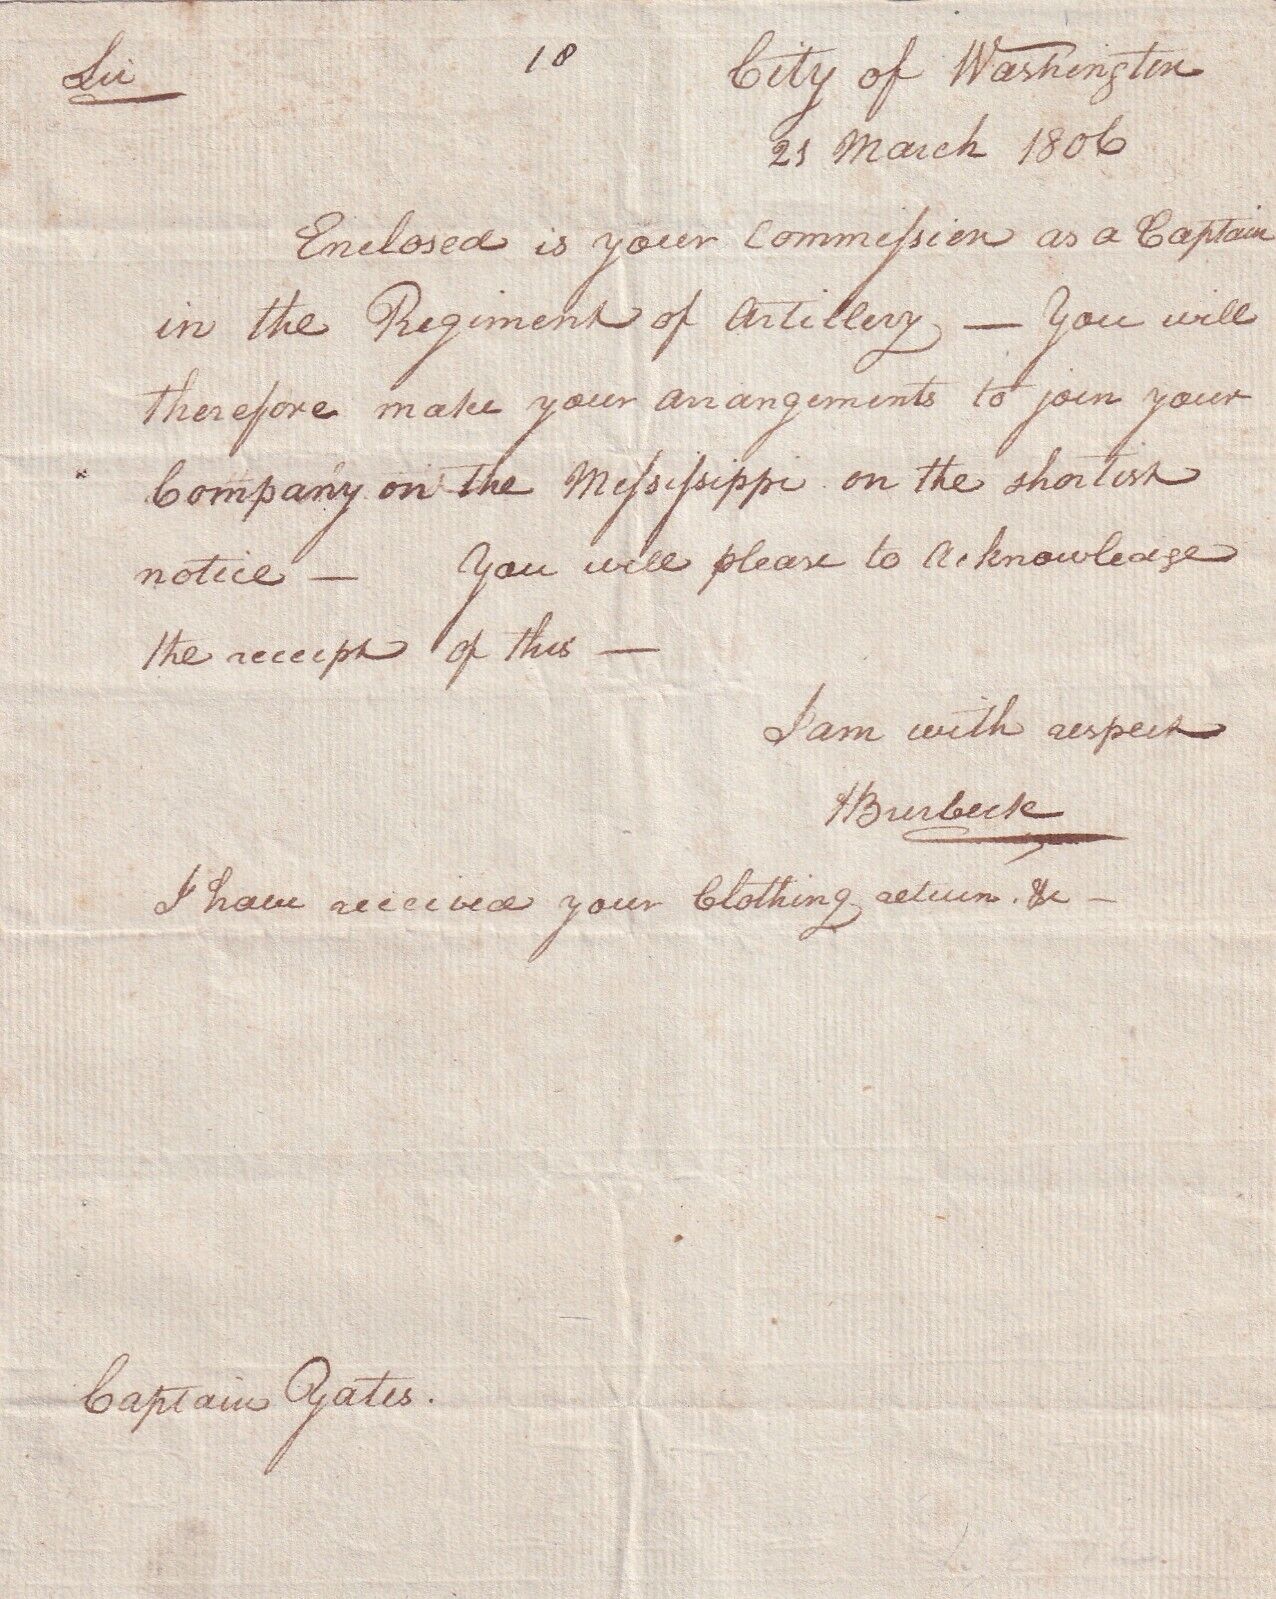 General Henry Burbeck letter d/l Washington 1806 to Captain William Yates  OF